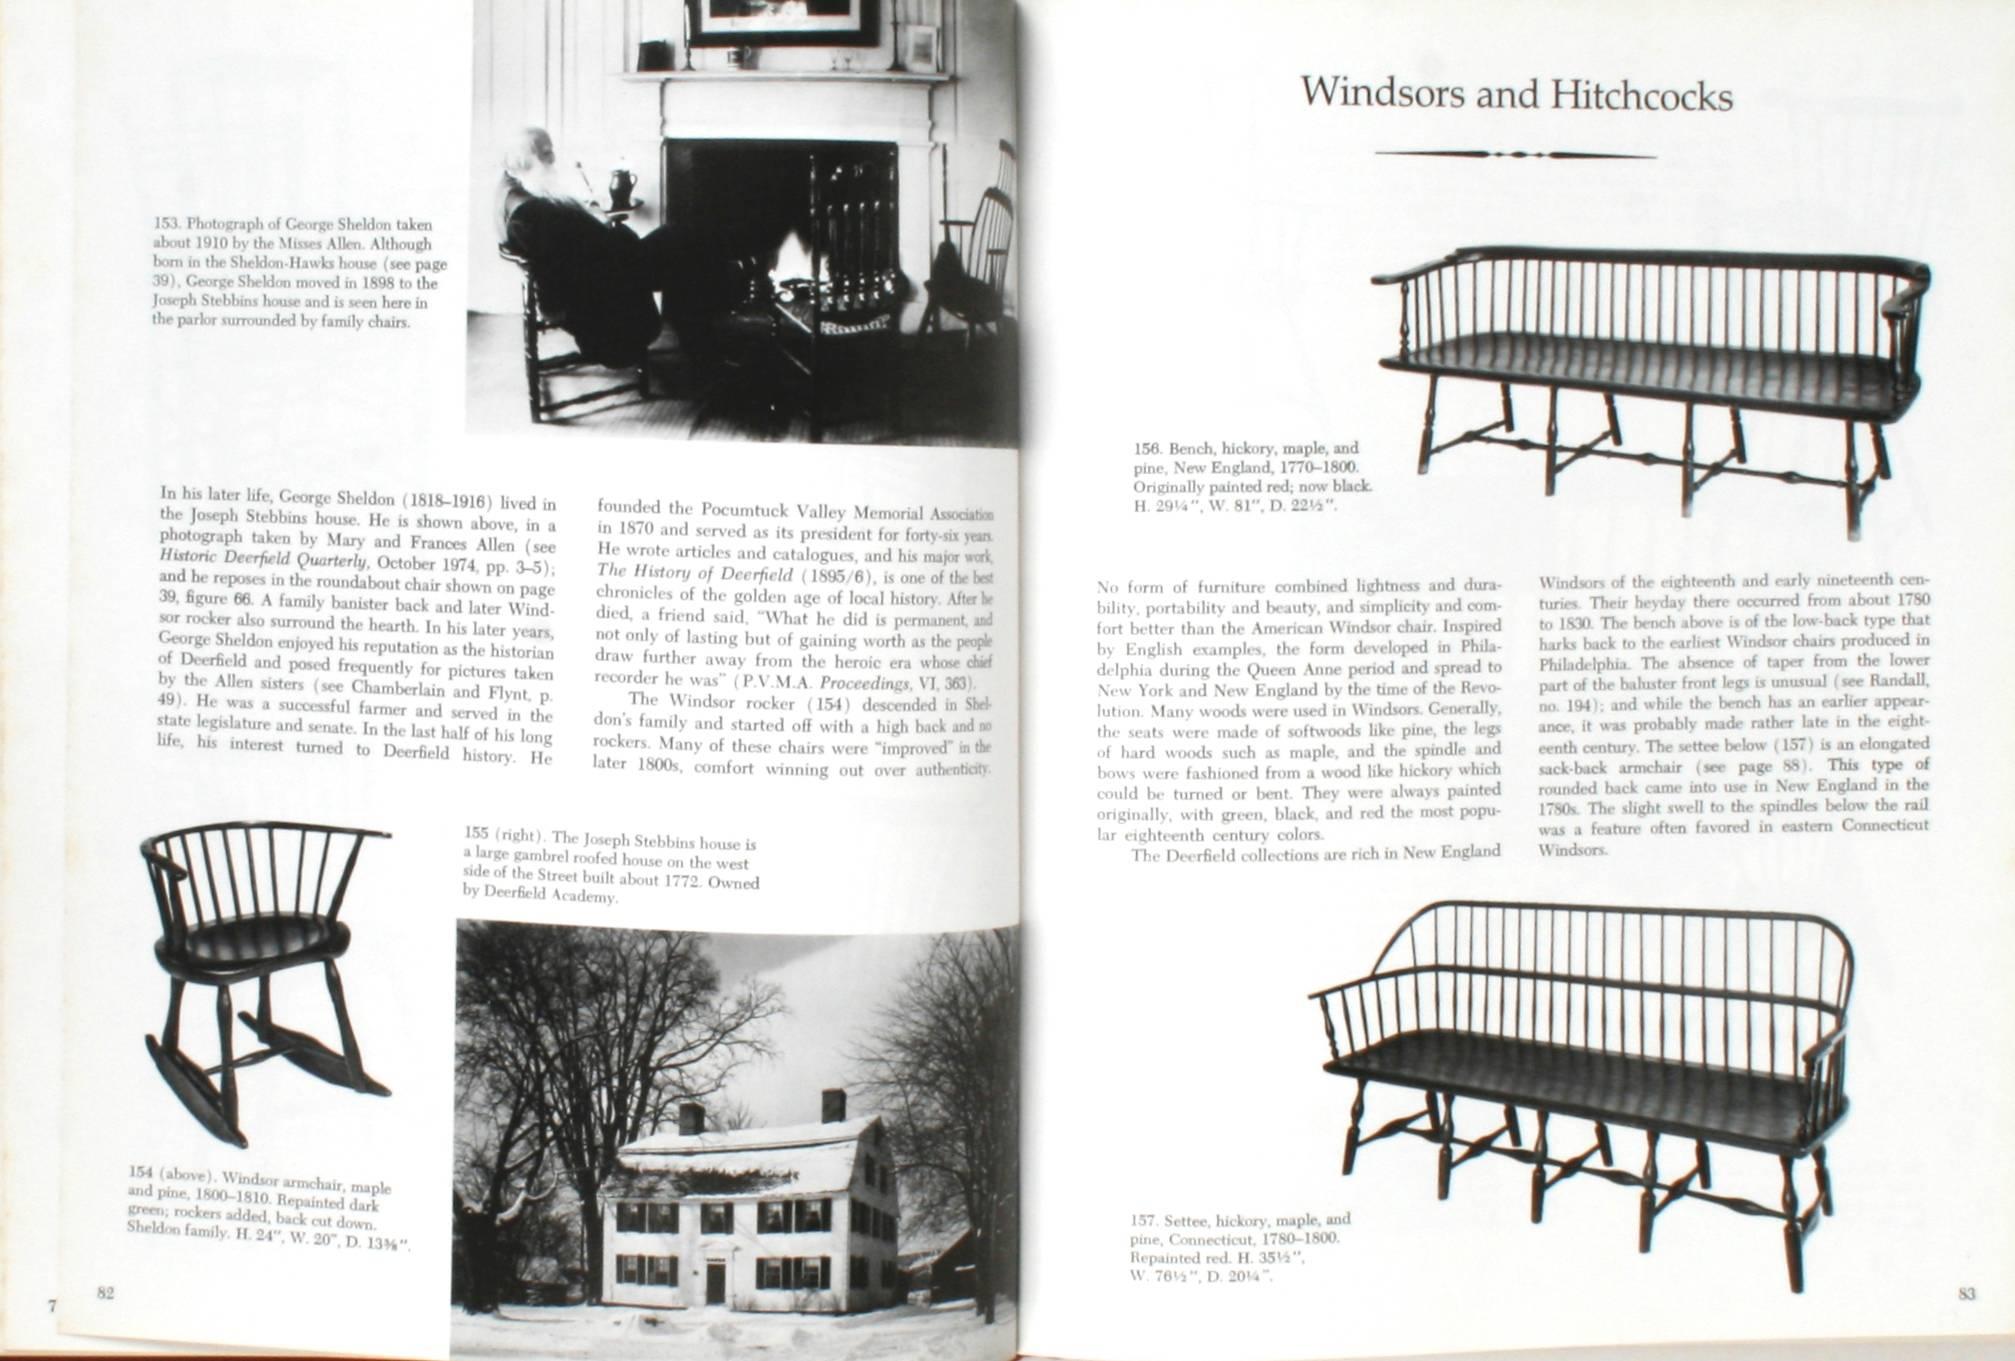 American Furniture of Historic Deerfield by Dean A. Fales, Jr. For Sale